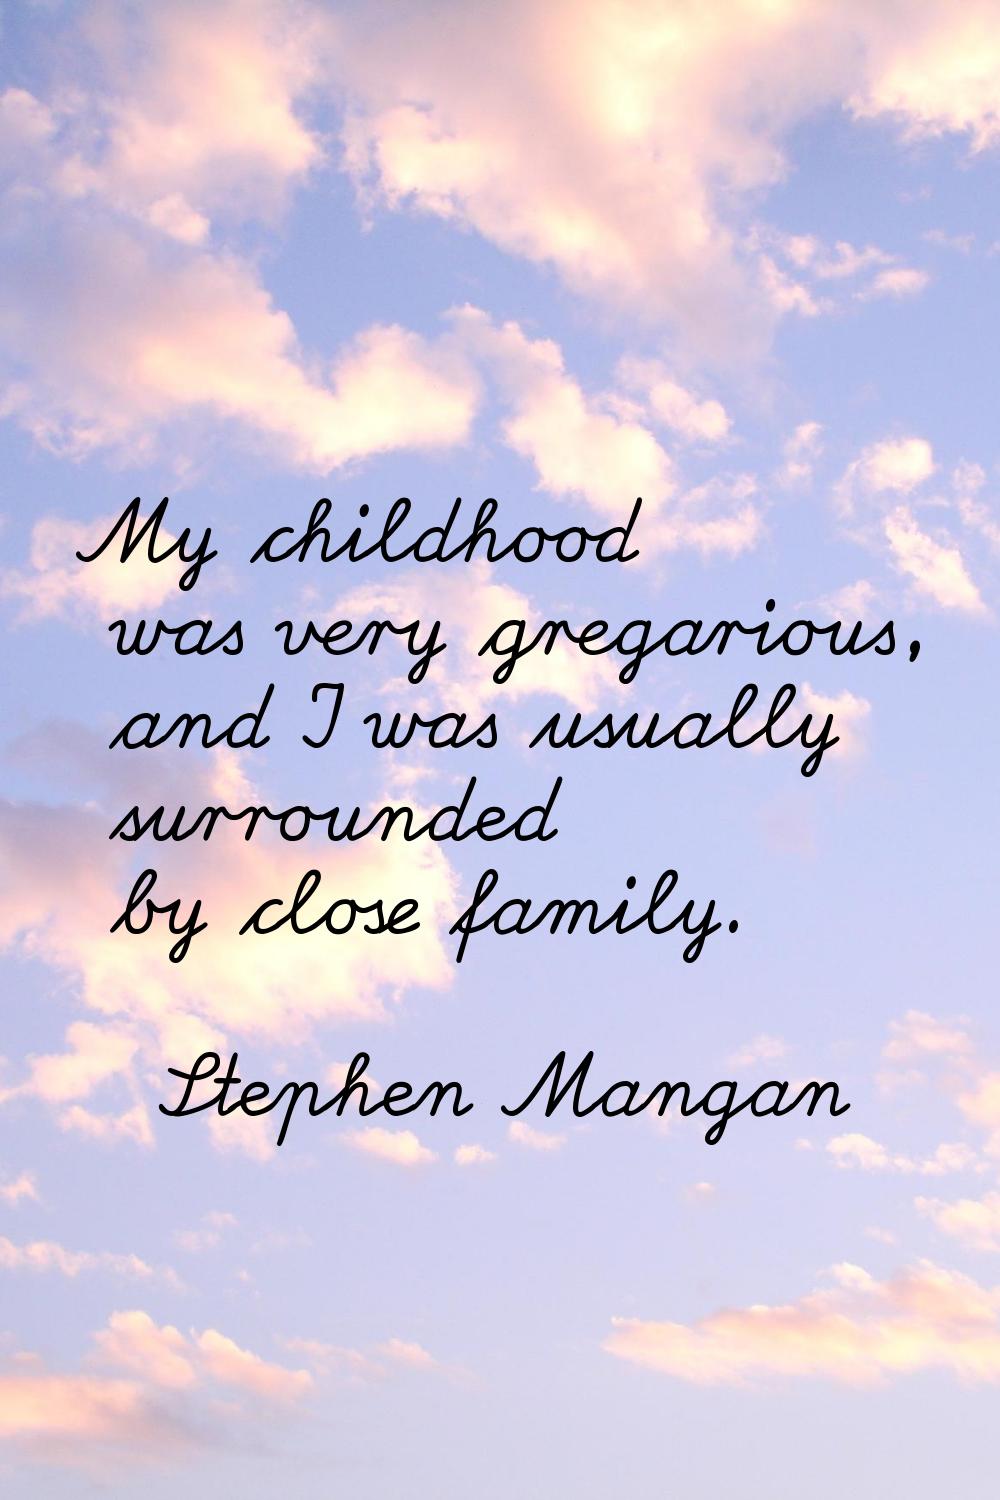 My childhood was very gregarious, and I was usually surrounded by close family.